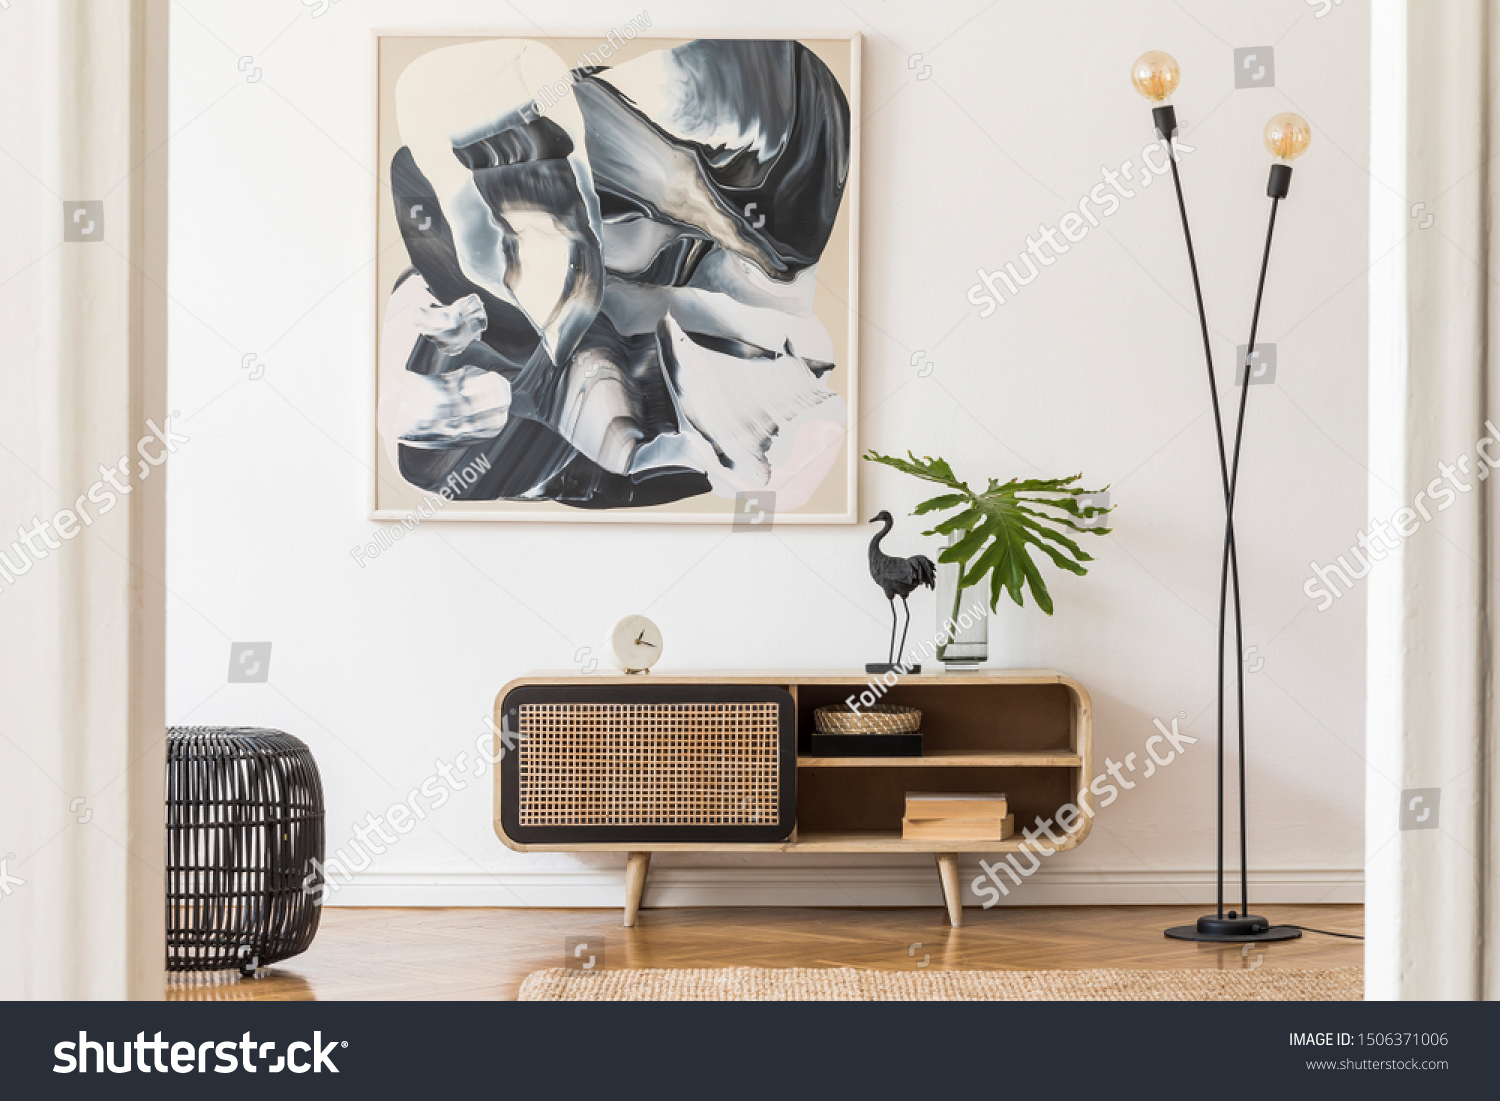 Stylish scandinavian living room interior with modern wooden commode, stylish lamps, plants, rattan basket, sculpture and elegant personal accessories. Mock up paintings on the white wall. Template.  #1506371006